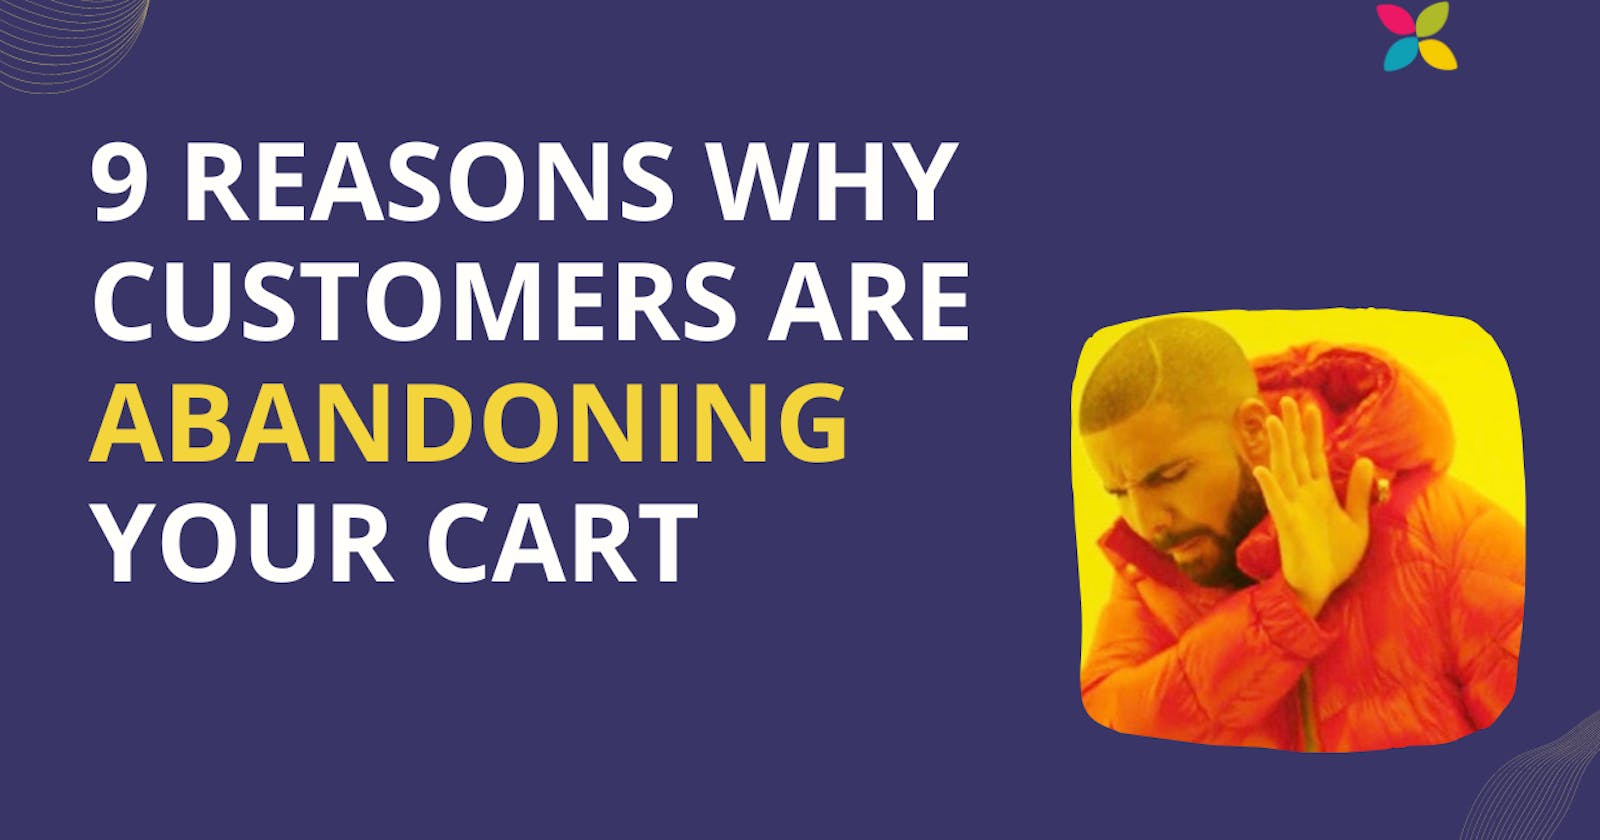 9 Reasons Why Your eCommerce Customers are Abandoning Cart